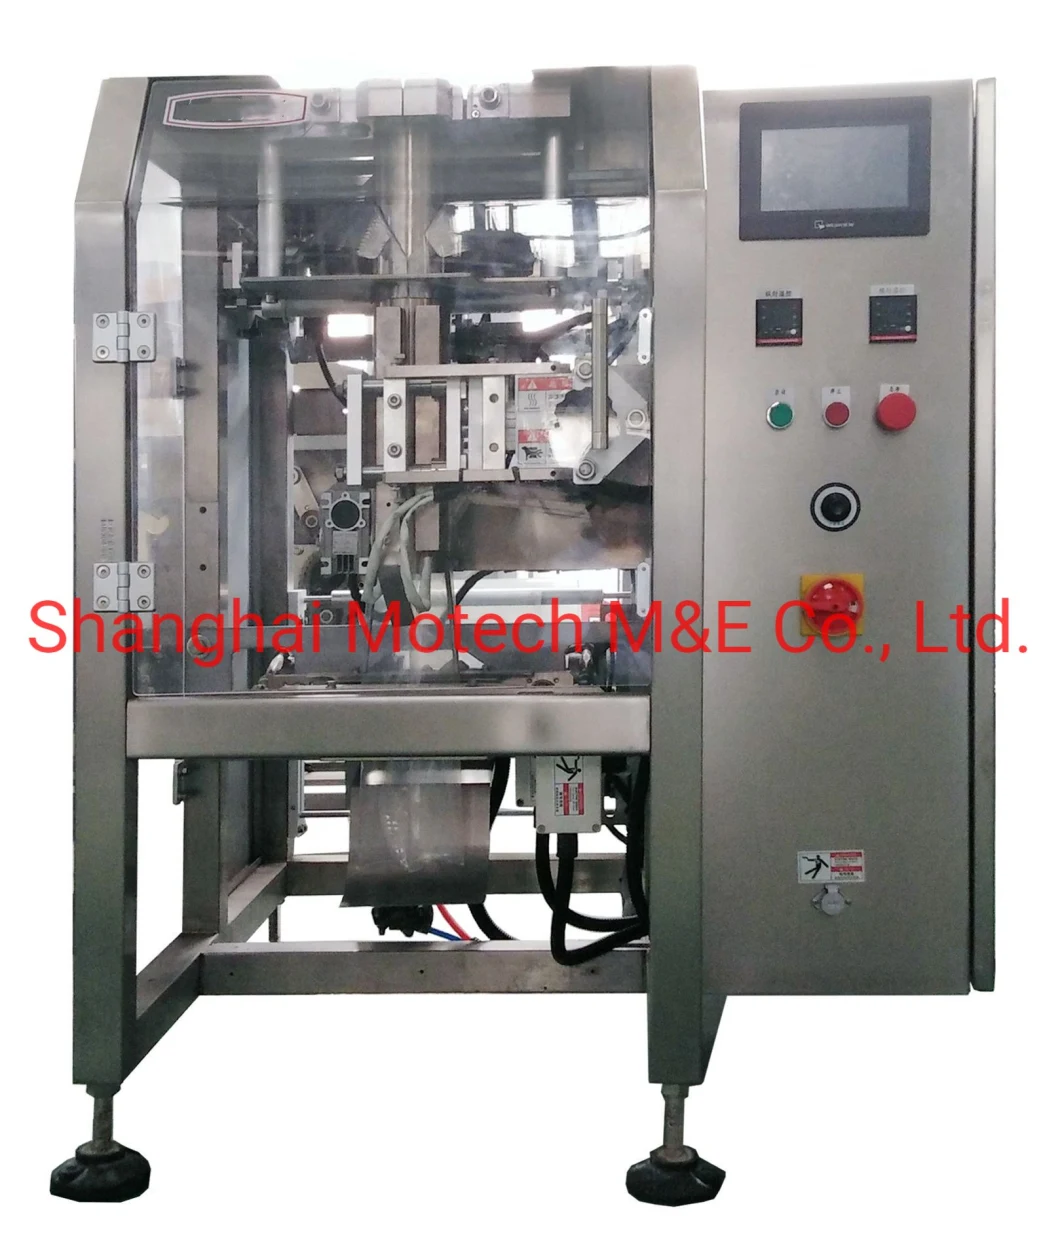 10 Heads Weigher with 2.5L Hopper Potato Chips French Fries Cashew Packing Machine